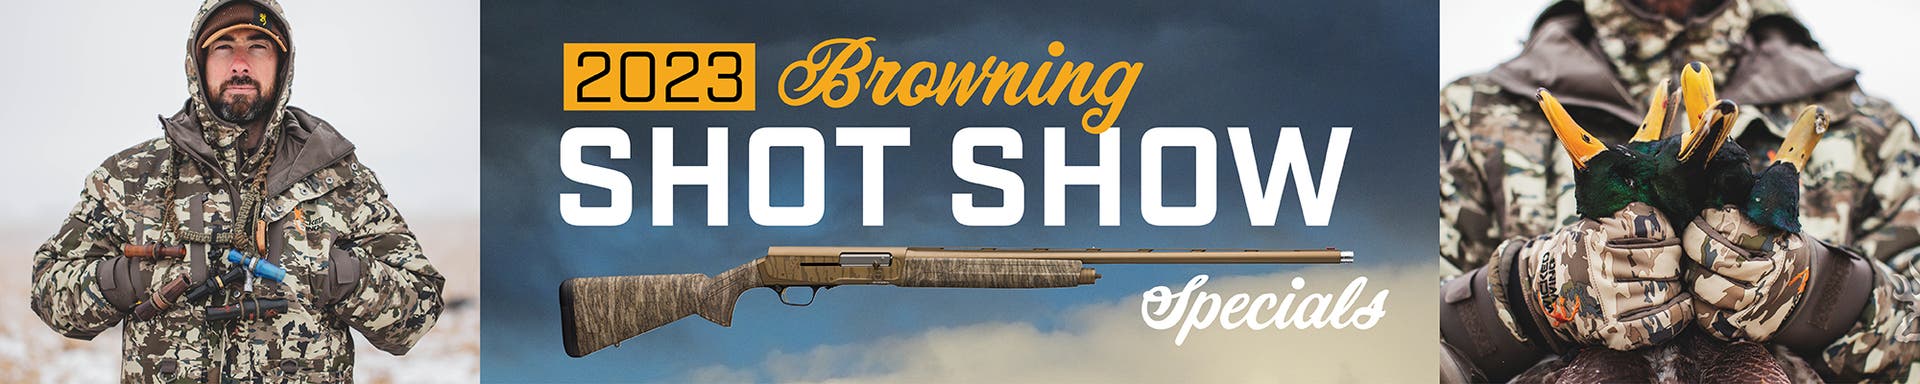 2023 Browning SHOT Show Specials